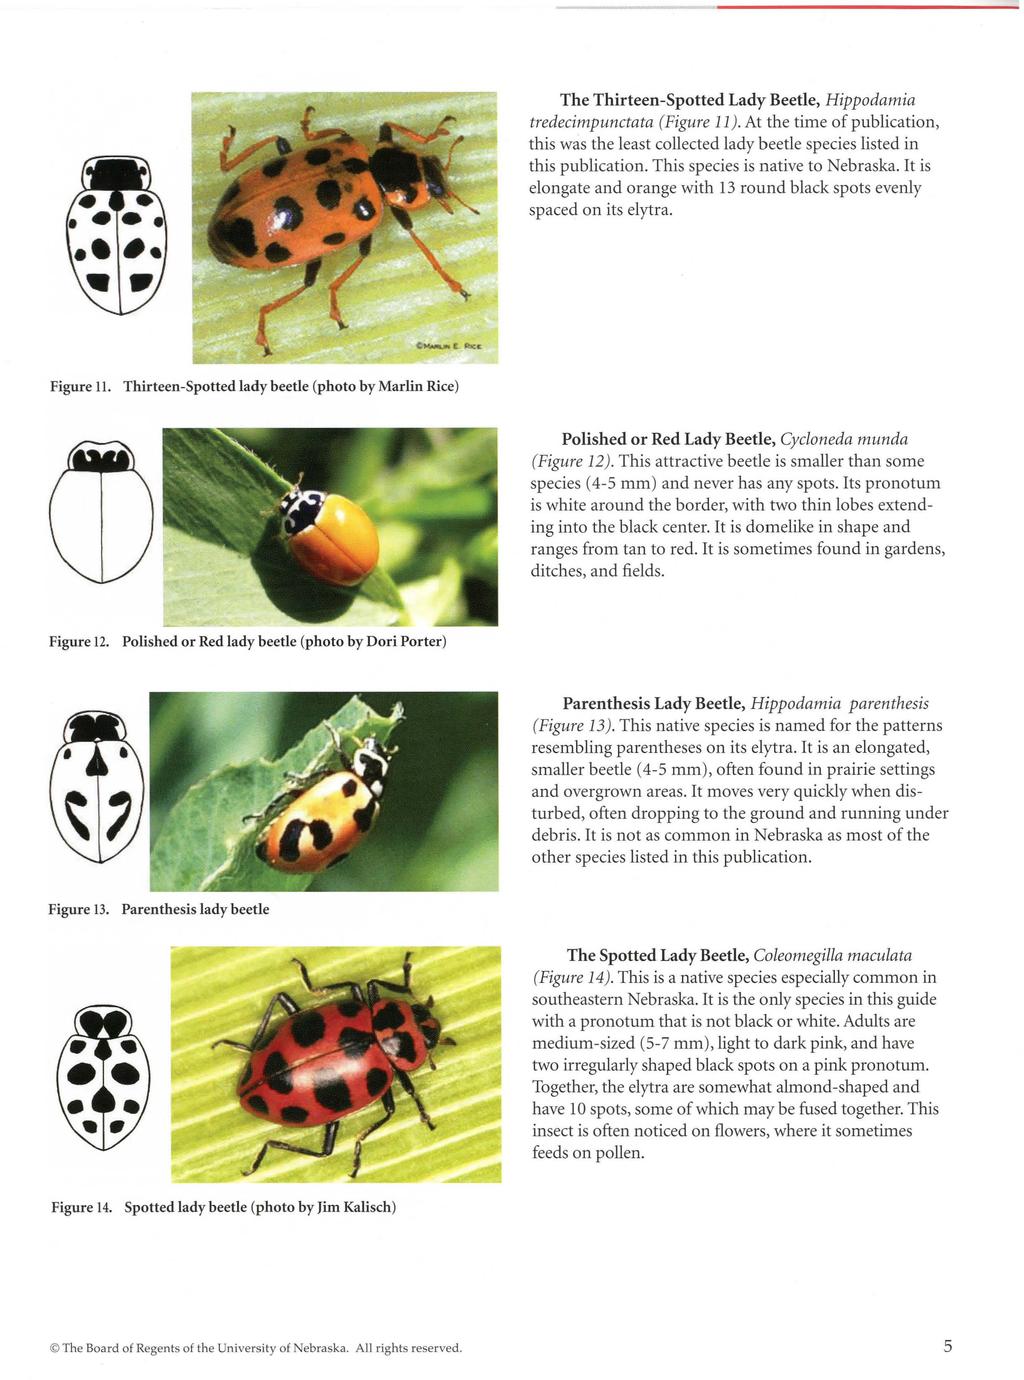 The Thirteen-Spotted Lady Beetle, Hippodamia tredecimpunctata (Figure 11 ). At the time of publication, this was the least collected lady beetle species listed in this publication.